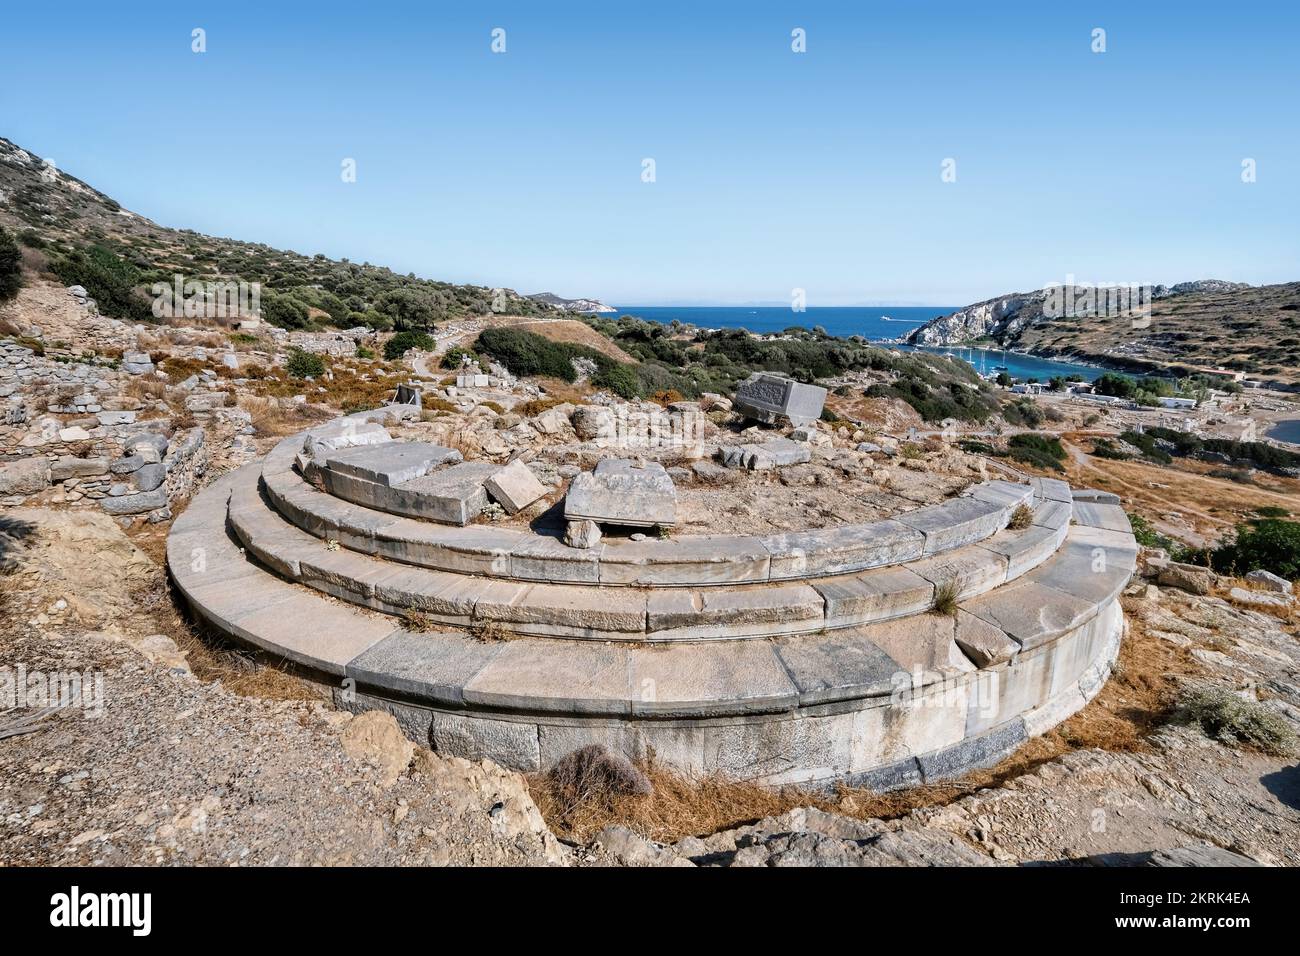 Datça, Muğla, Turkey, Sep. 2021: View of the round Temple of Aphrodite temple at Knidos. Archaeological site of ancient Greek city Knidos in Datca Stock Photo